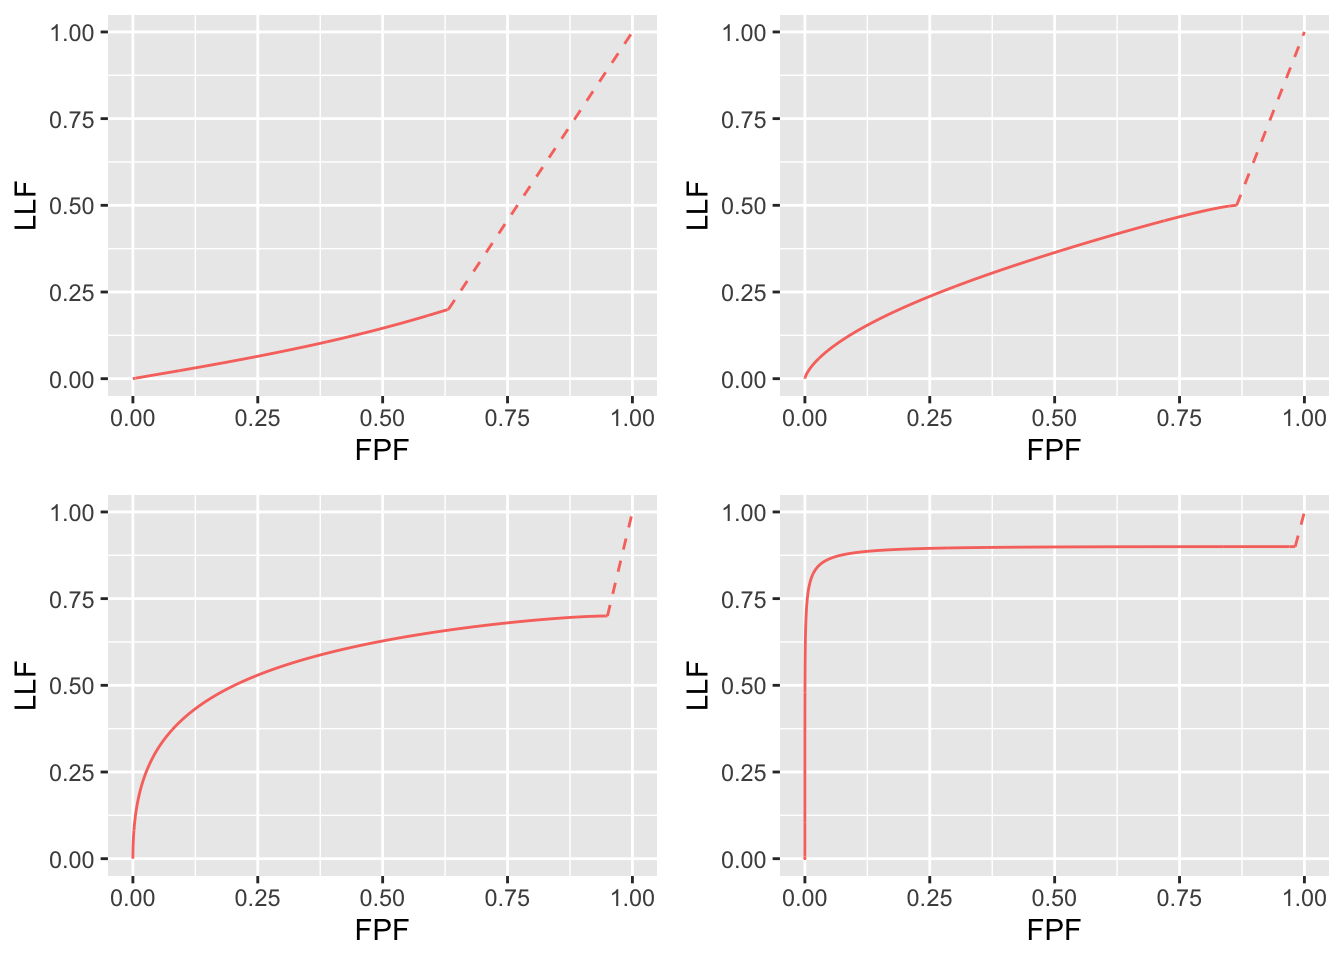 RSM-predicted AFROC curves, $\lambda, \nu$ paramterization, using same parameter choices as in preceding plot. Note the unrealistic concave up feature of the top-left plot due to unrealistic choices of parameters.